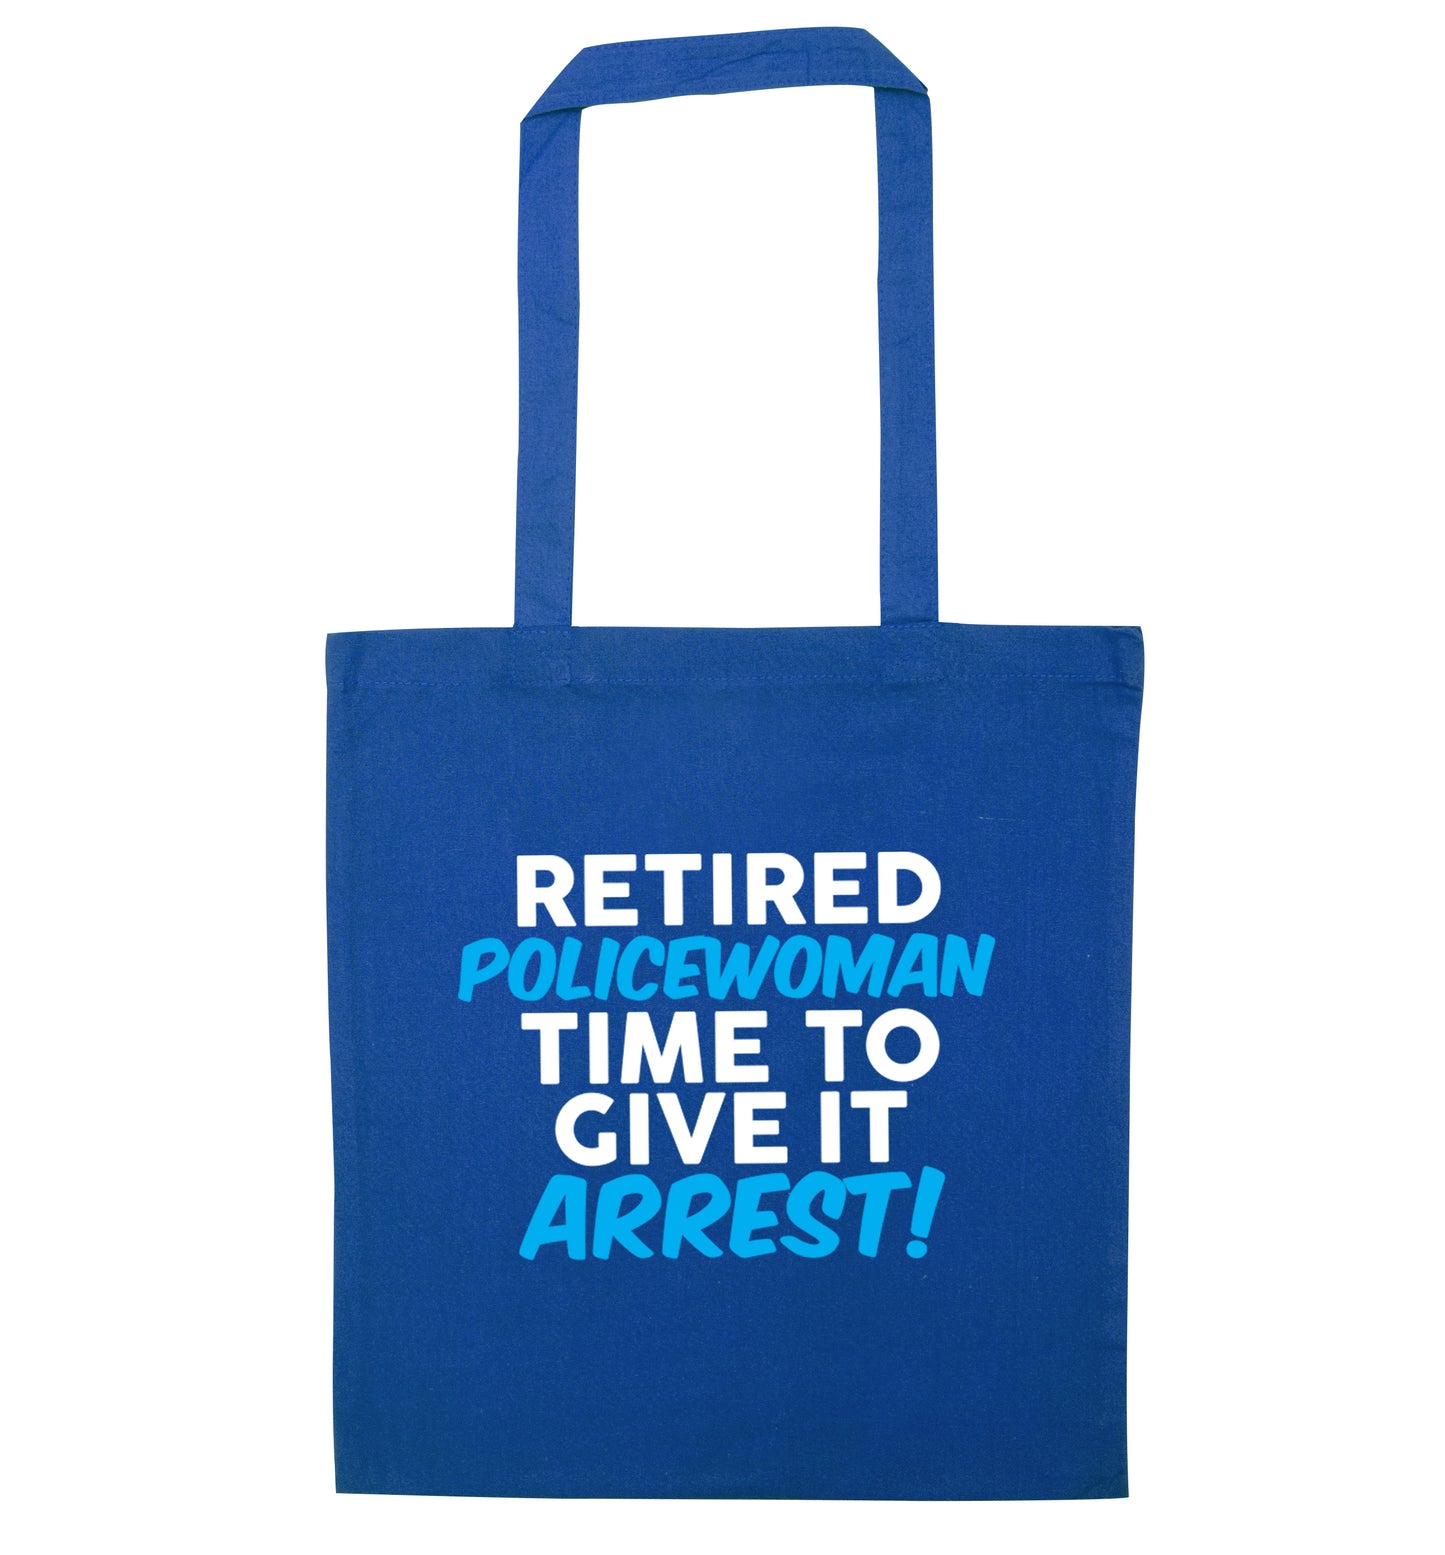 Retired policewoman time to give it arrest blue tote bag